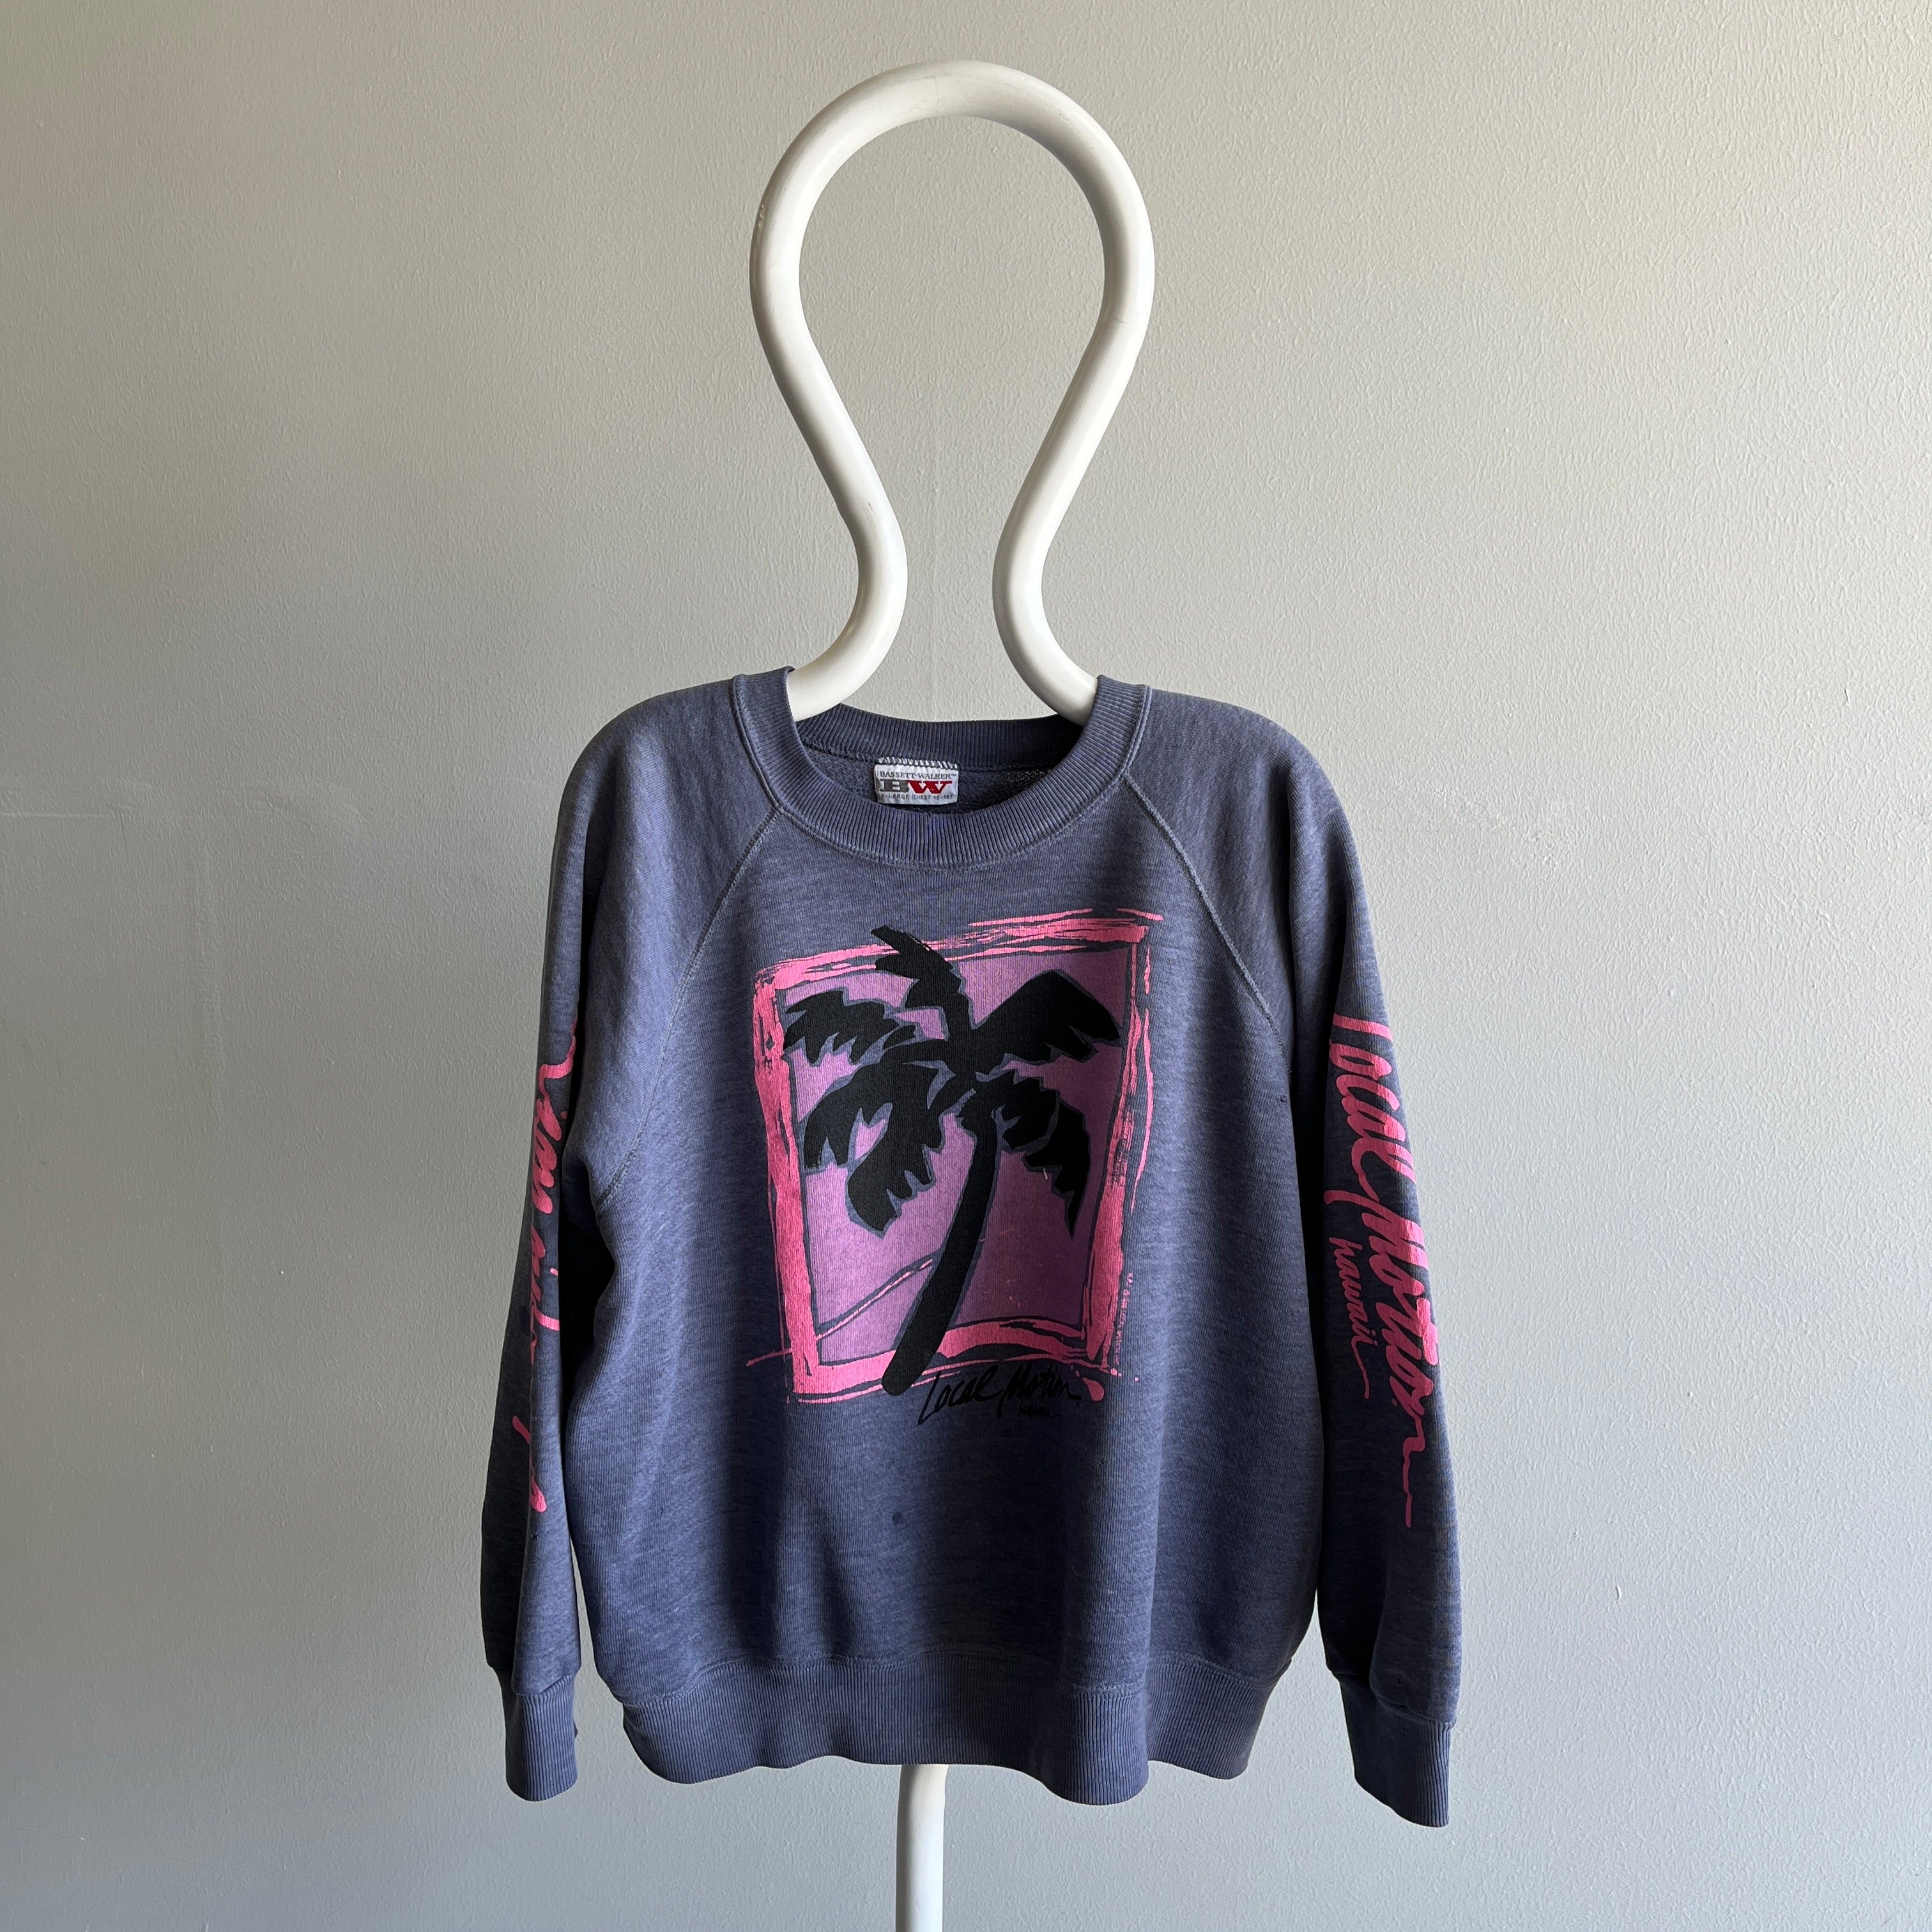 1990s Hawaii Faded and Worn Sweatshirt - Personal Collection